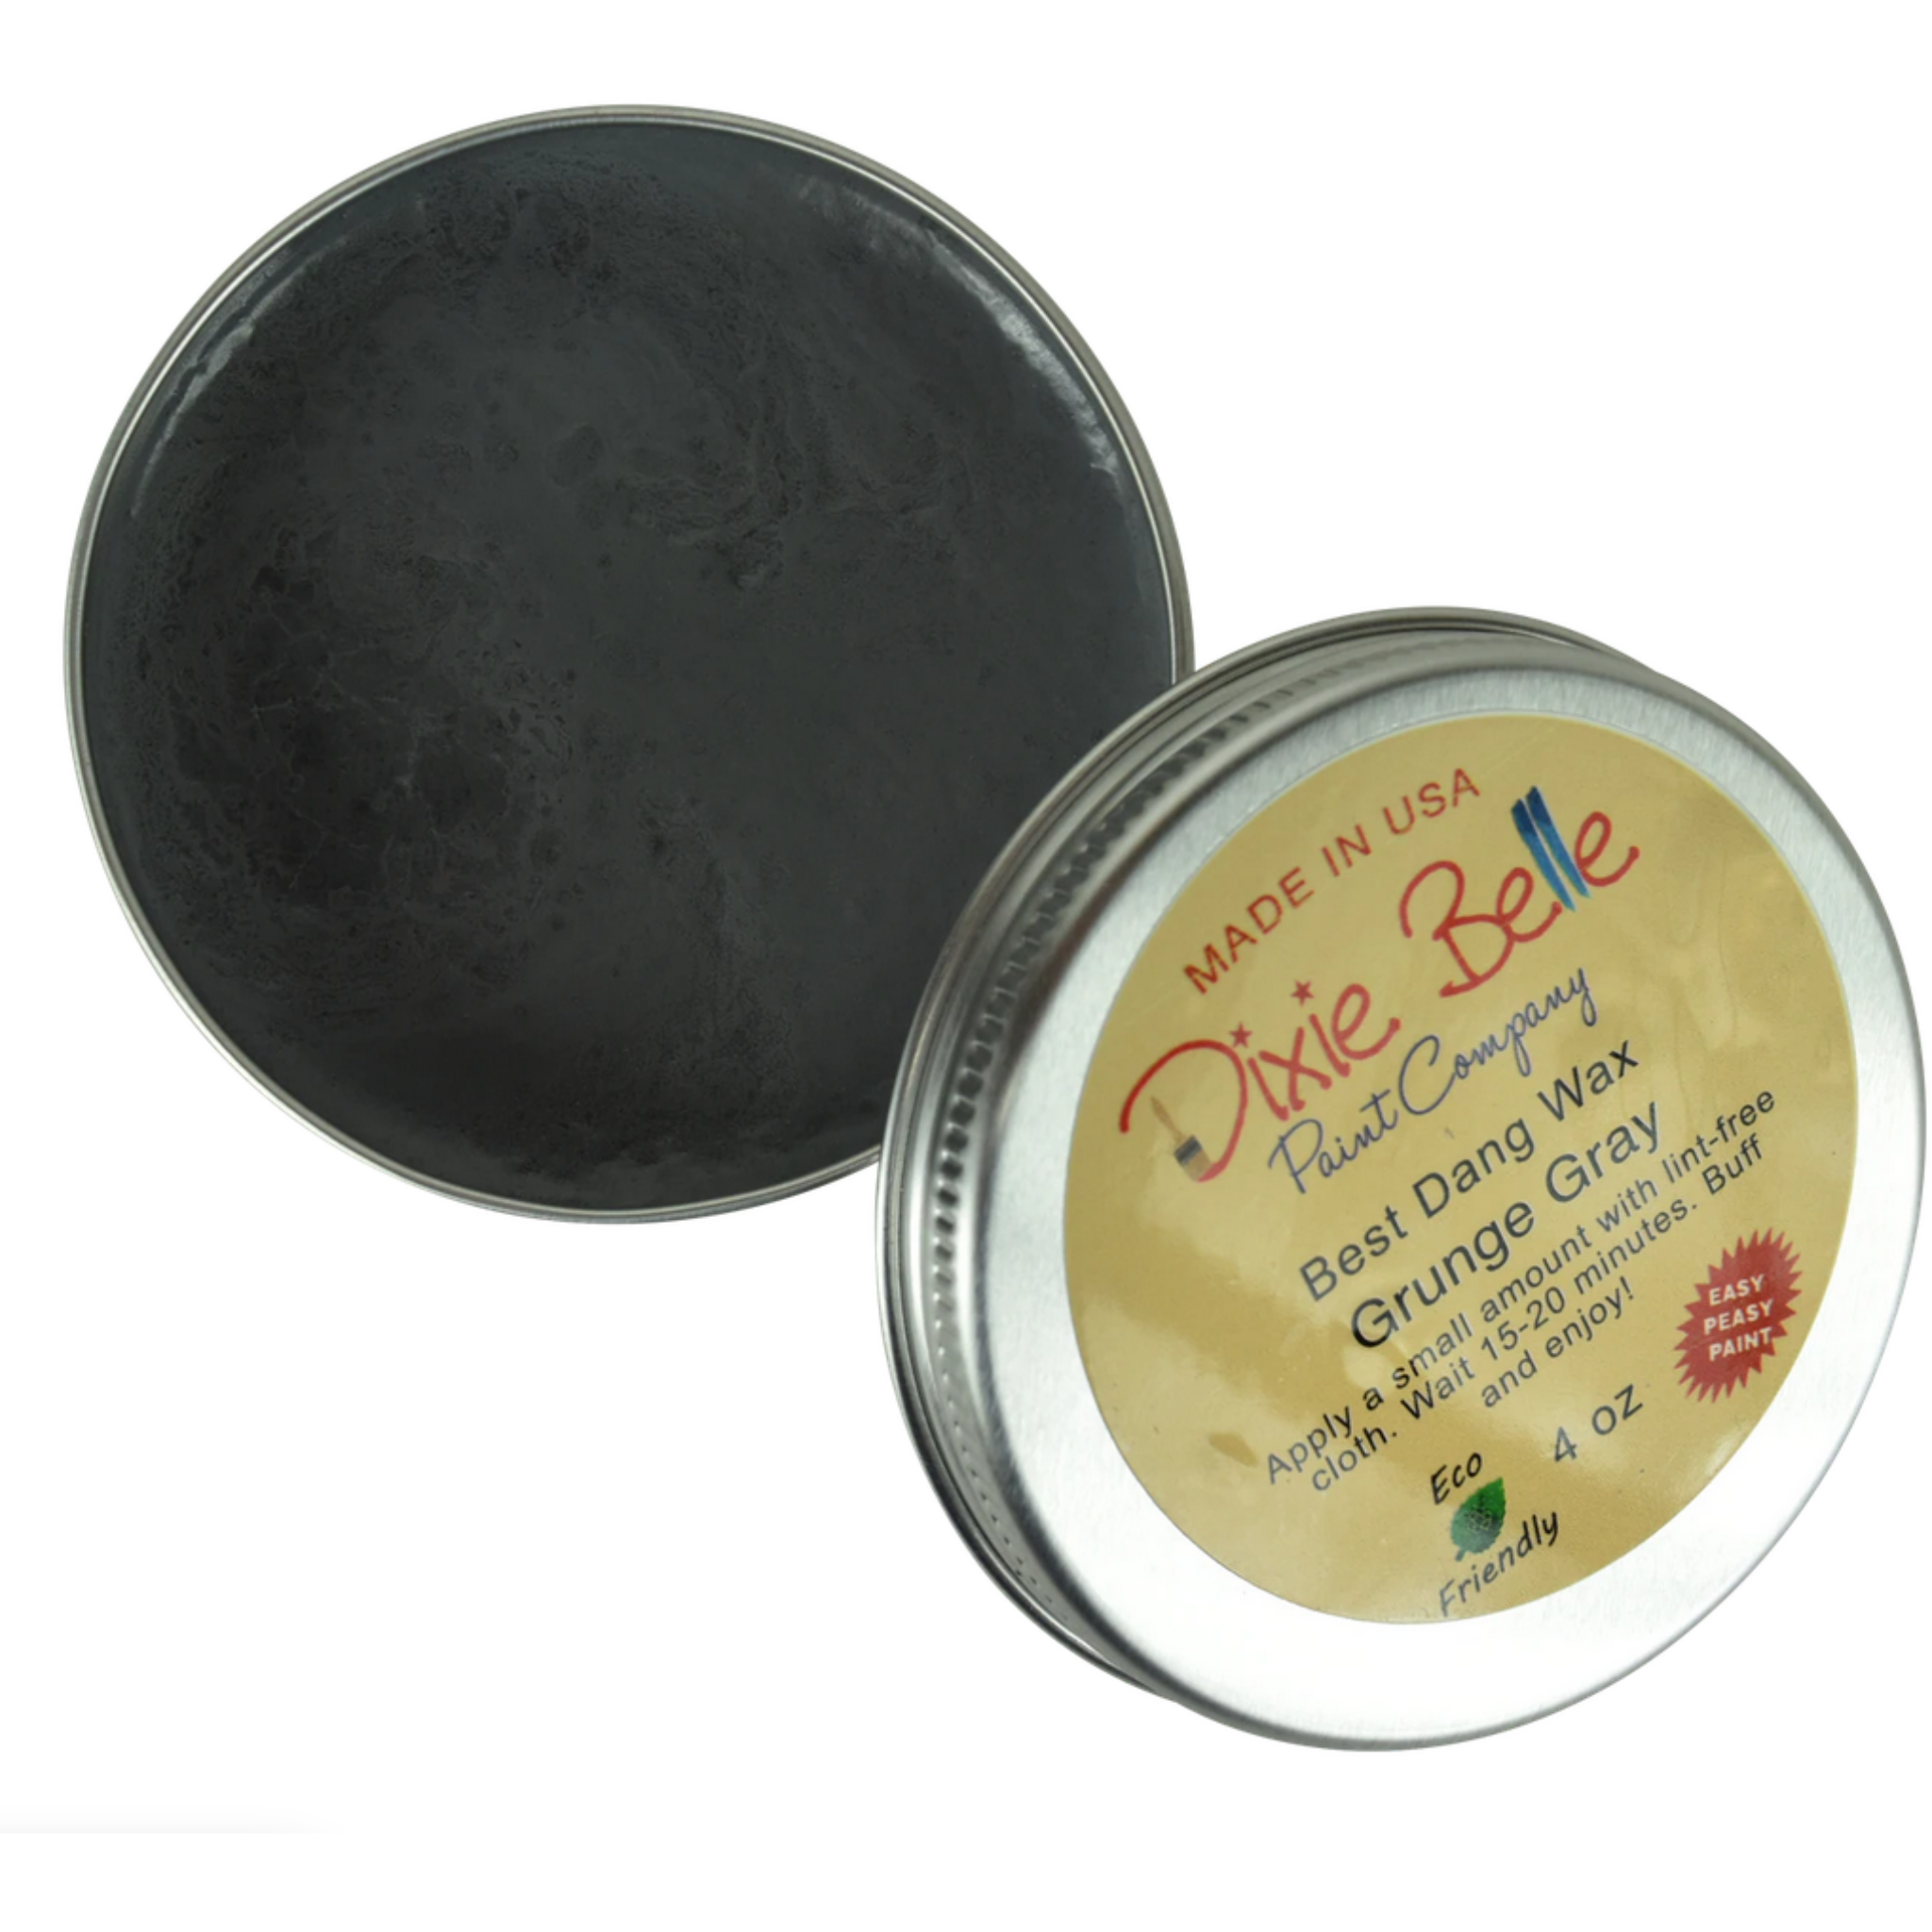 An open tin of Dixie Belle Paint's 4 ounce Grunge Gray Best Dang Wax is against a white background.